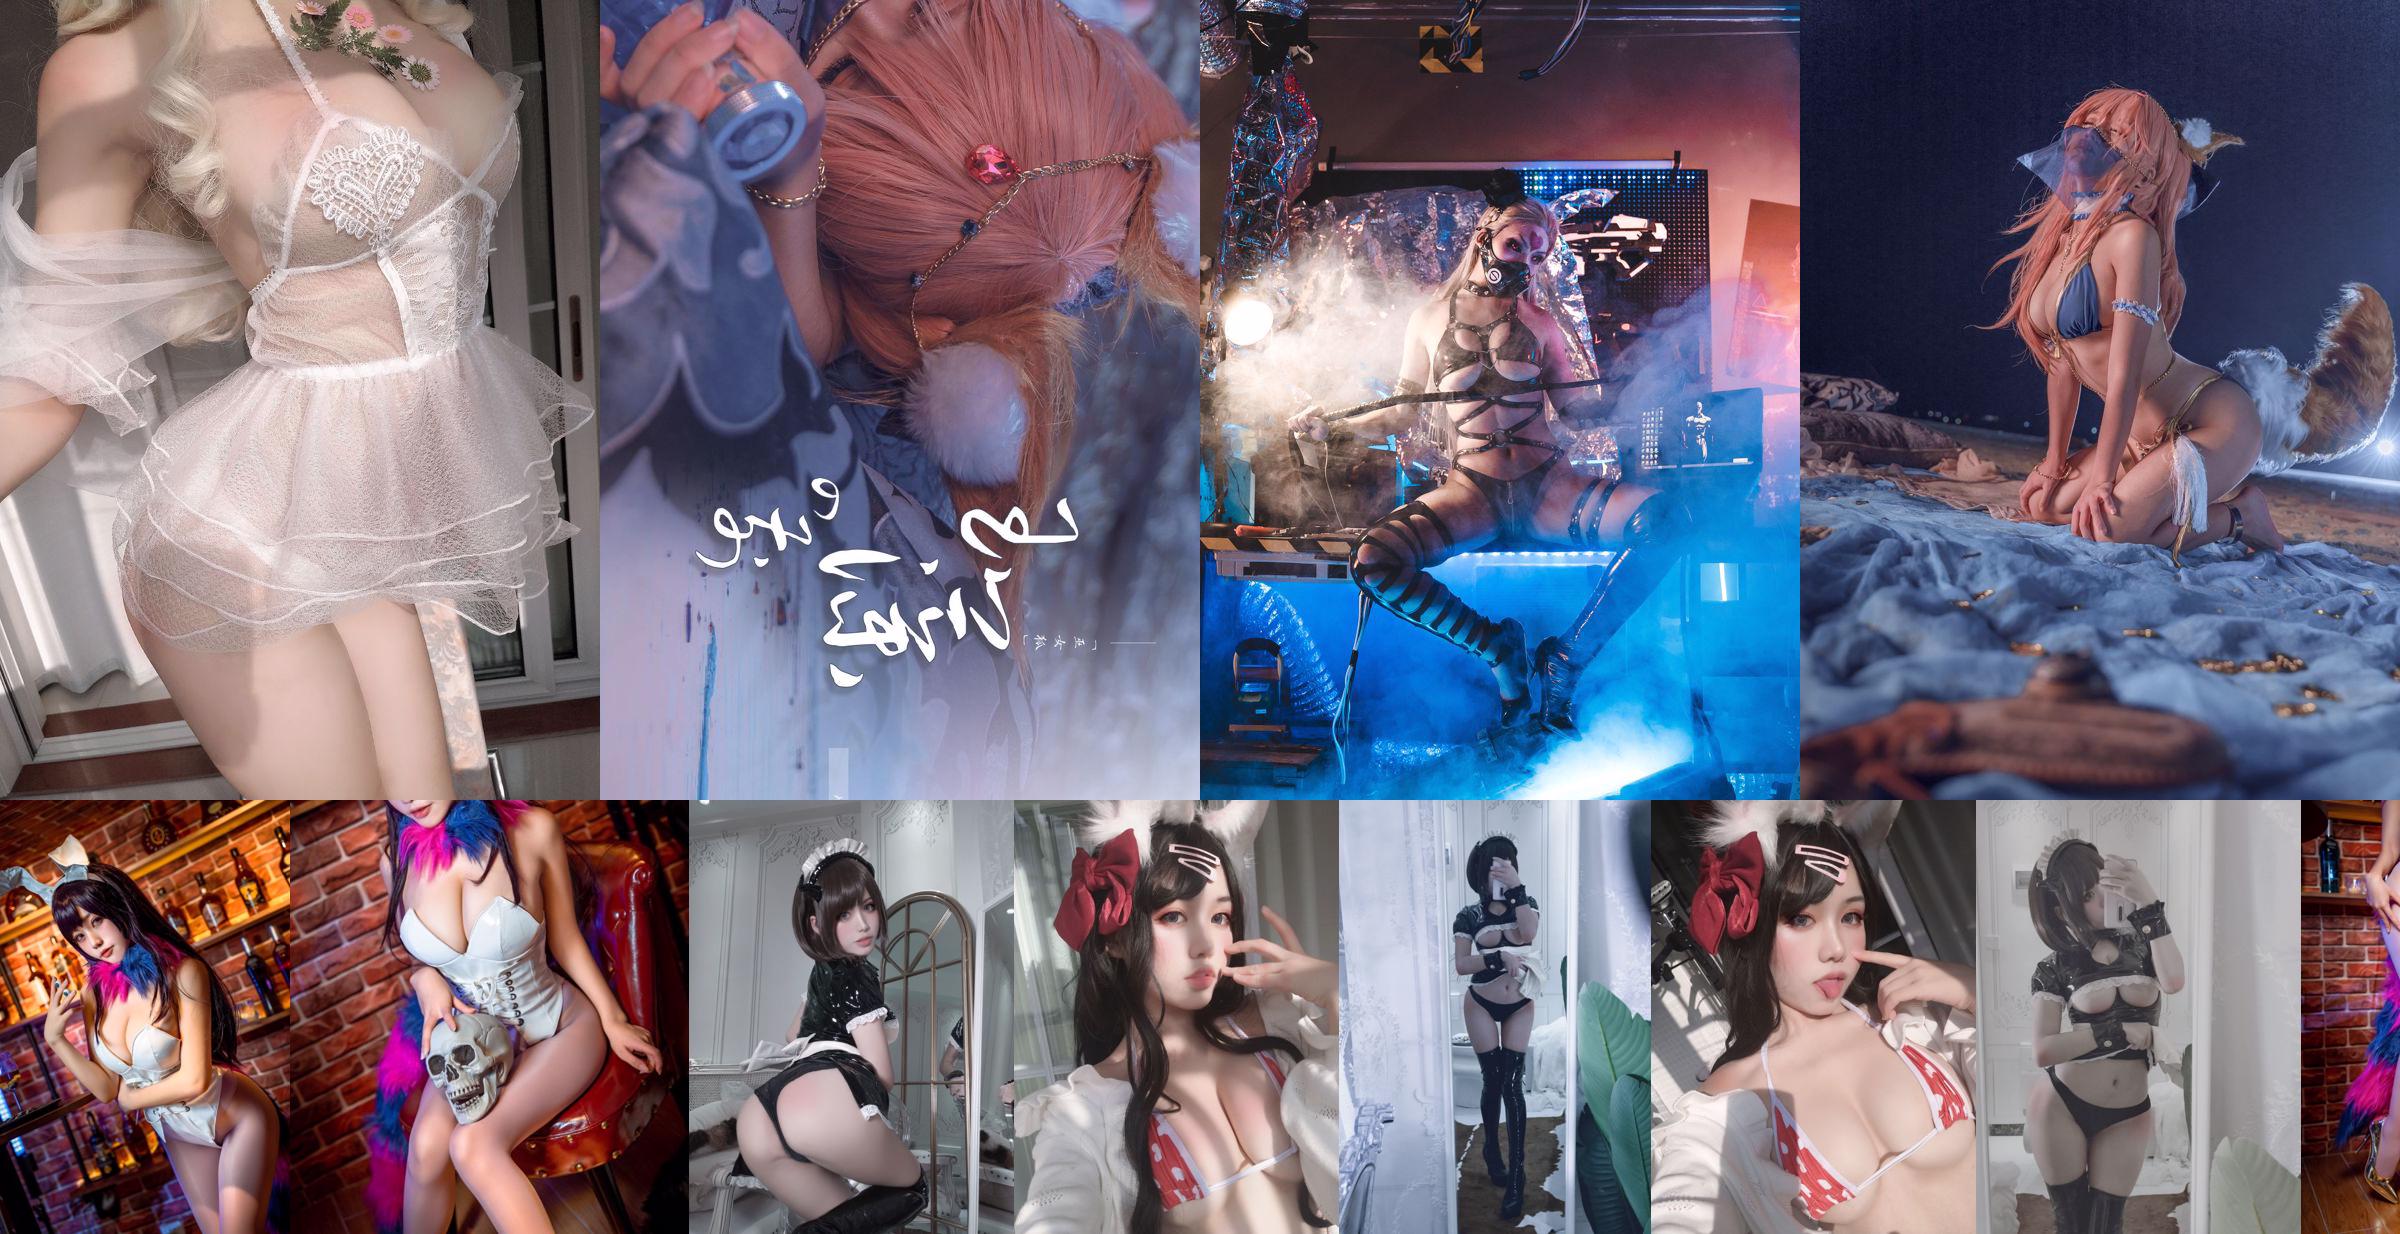 [Beauty Coser] "Dancing Girl" No.794d9d Page 3